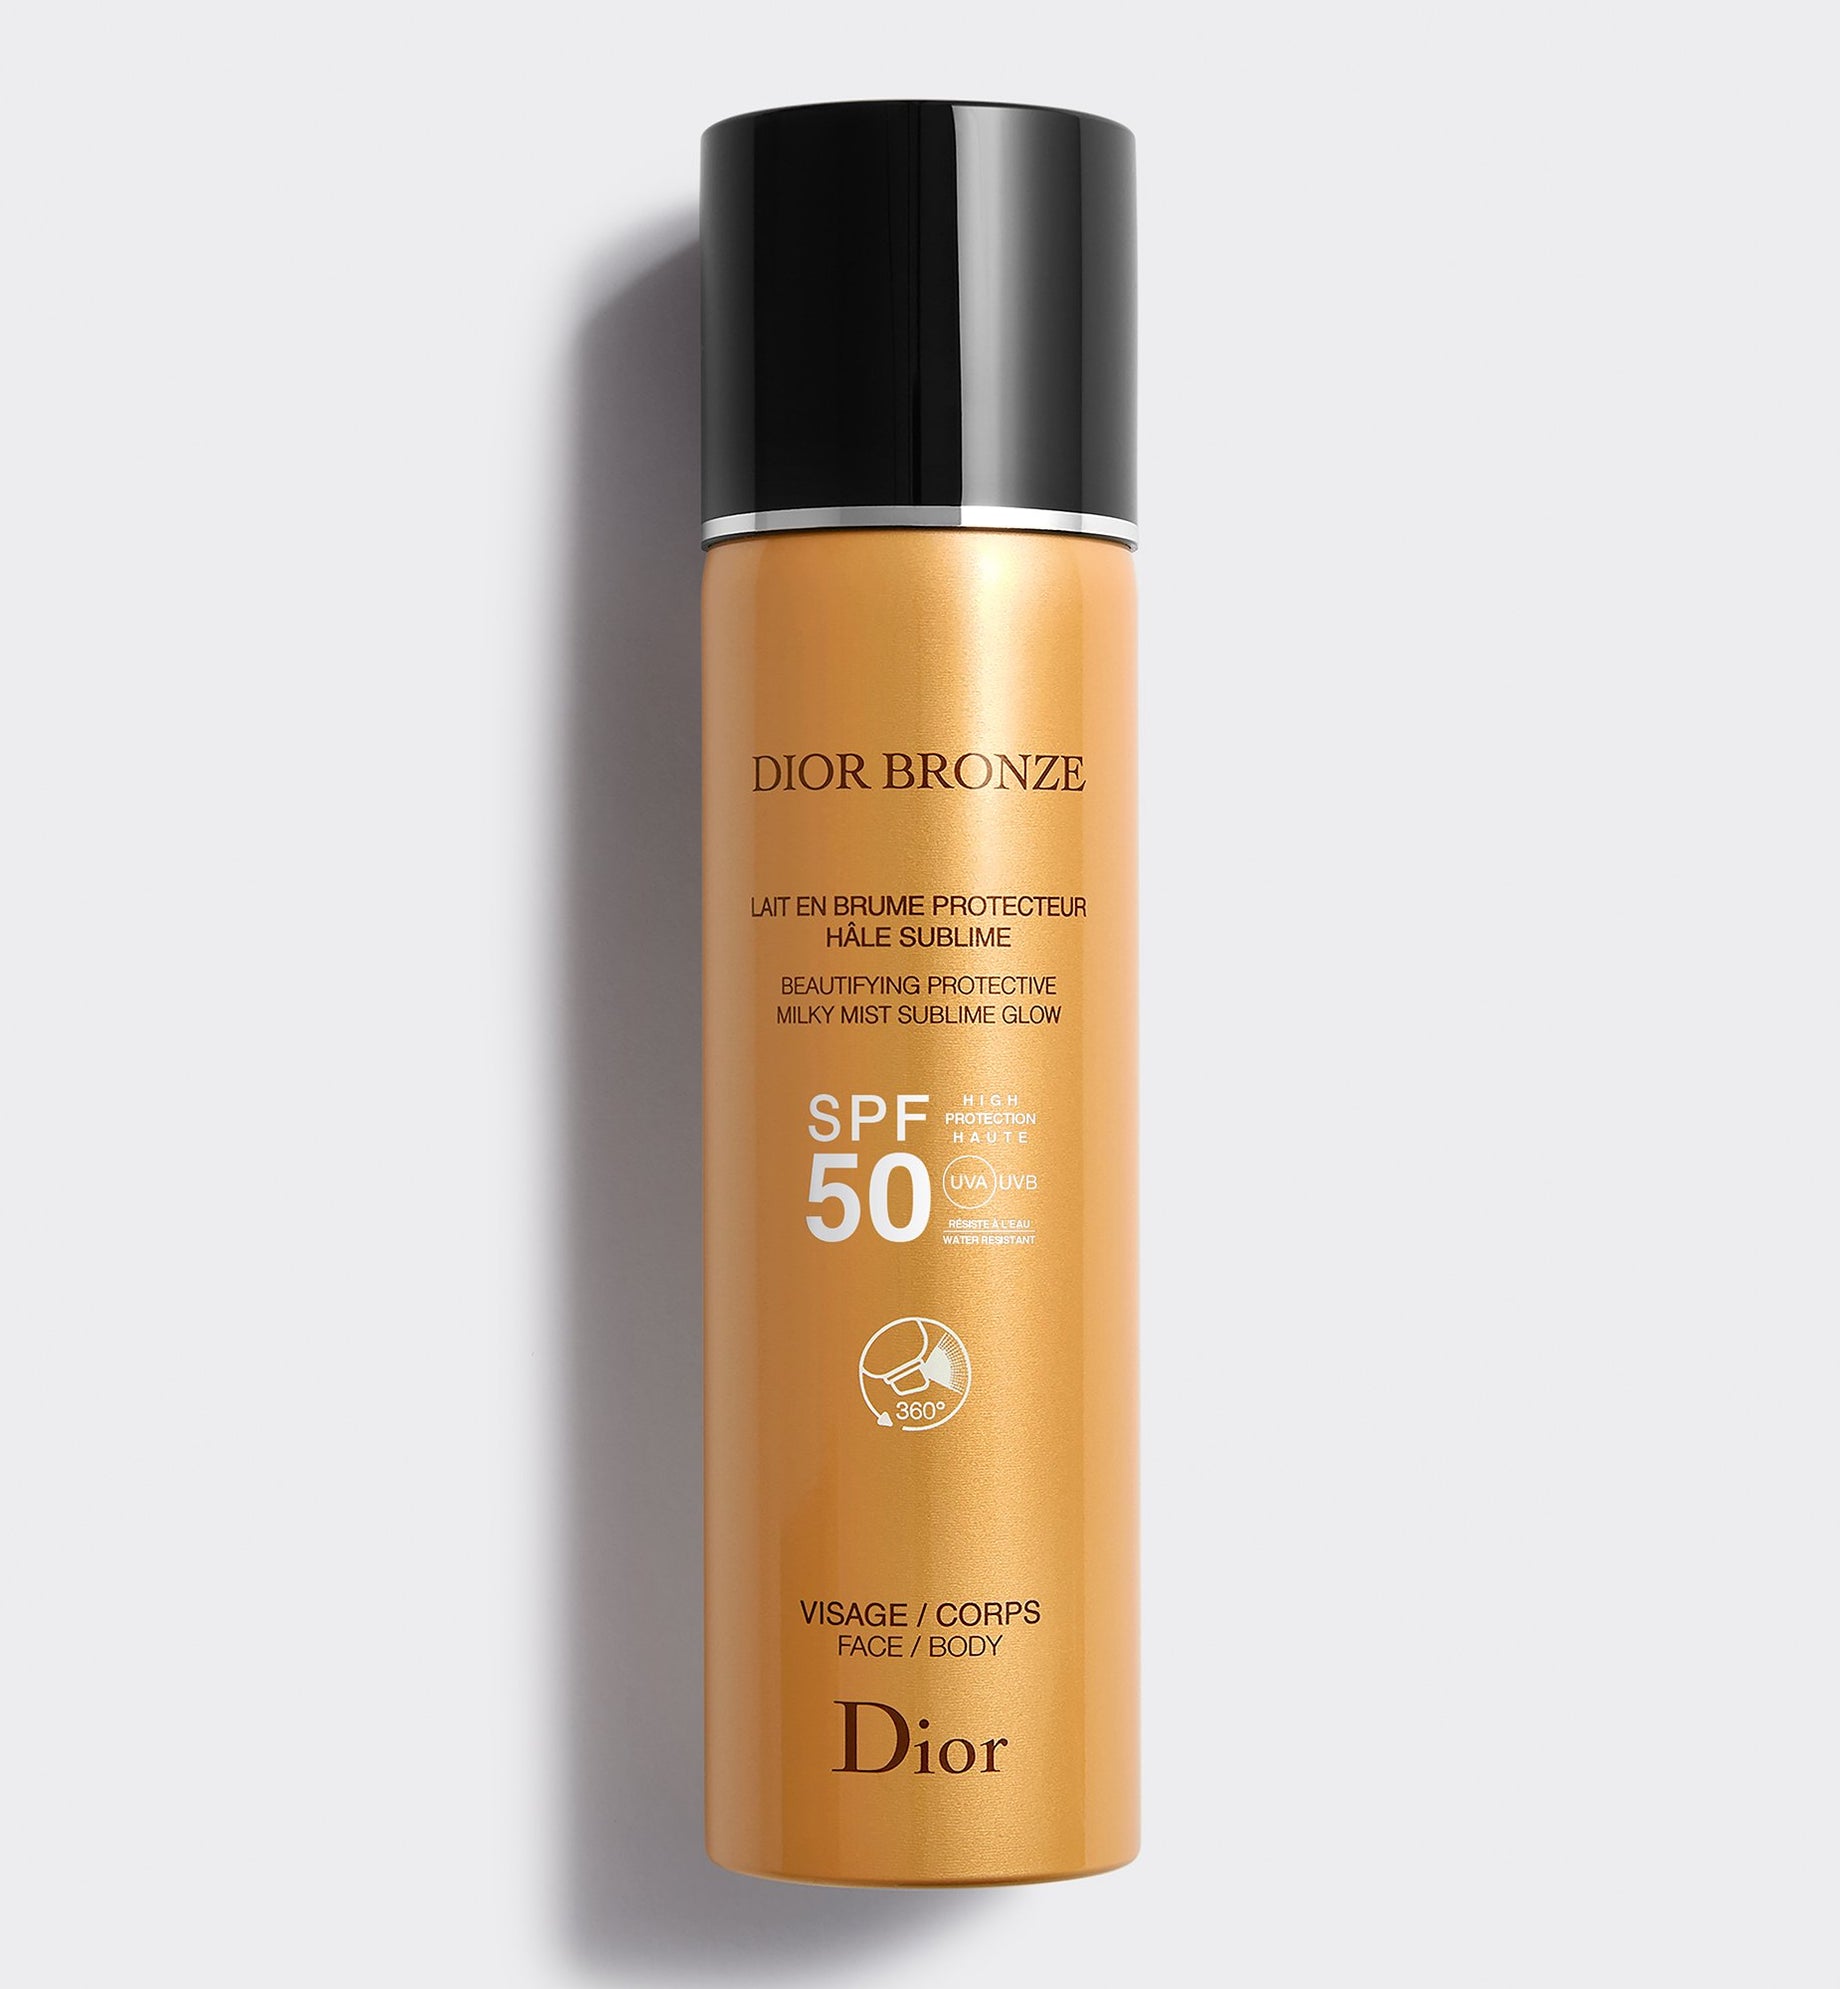 DIOR BRONZE BEAUTIFYING PROTECTIVE MILKY MIST SUBLIME GLOW SPF 50